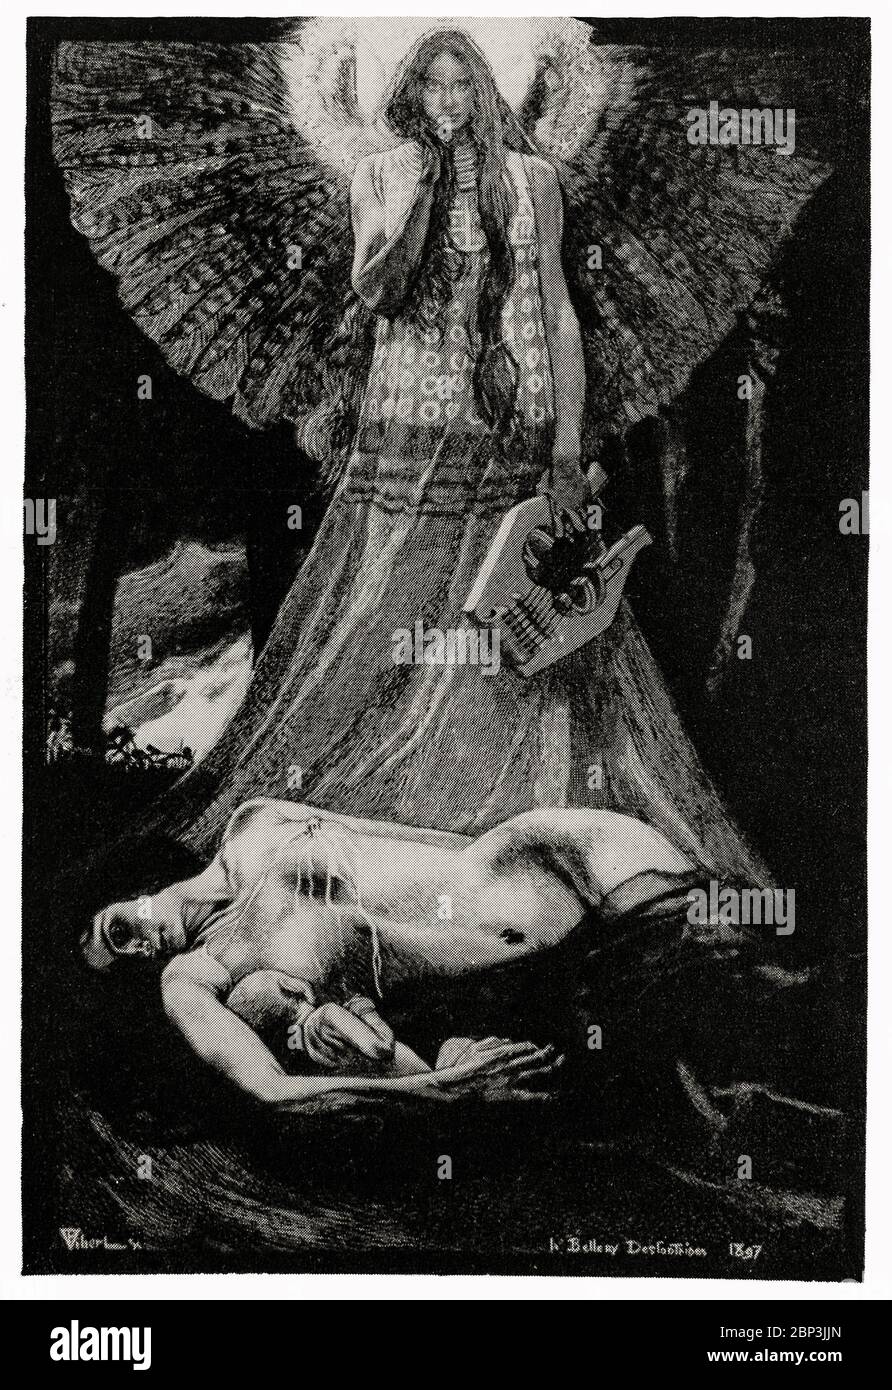 'The Angel of Death' by Henri Bellery-Desfontaines (1867-1909), a French Art Nouveau painter, decorator and illustrator renowned for his posters, lithographs, tapestries, furniture, bank note designs, typography, and other works of decorative arts. He gradually achieved notoriety as an ambitious decorative artist and an important fine artist. Stock Photo